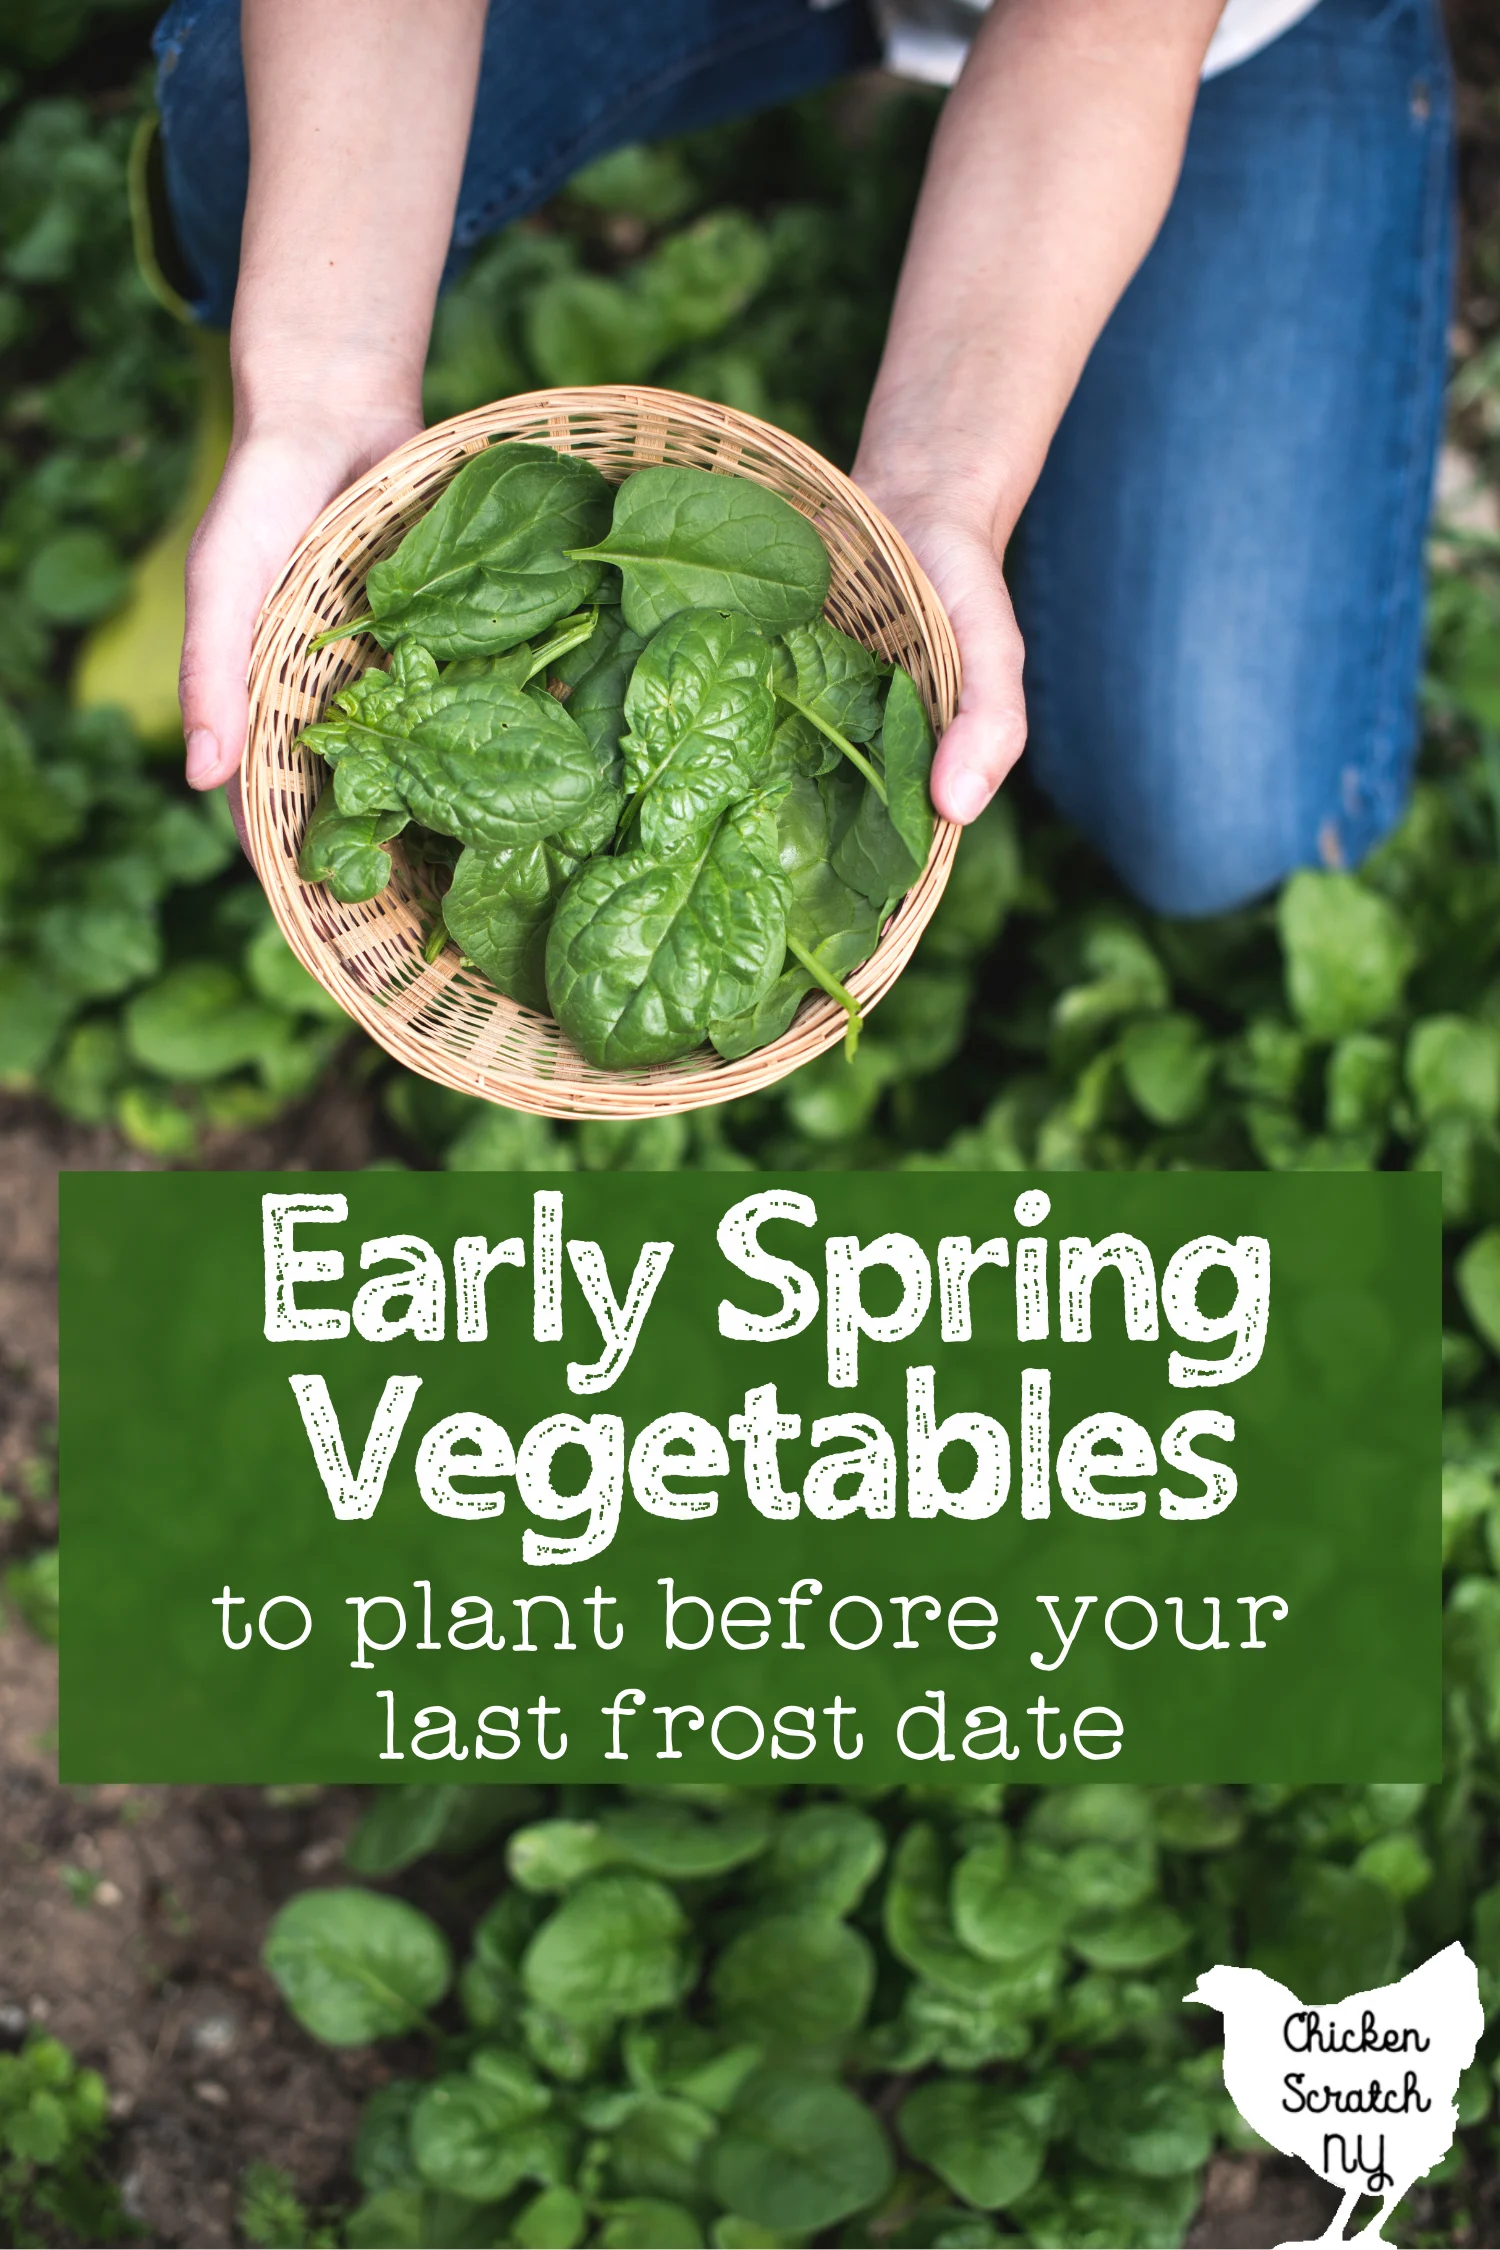 hands holding a bowl of fresh spinach leaves in the garden with text overlay " early spring vegetables to plant before your last frost date"